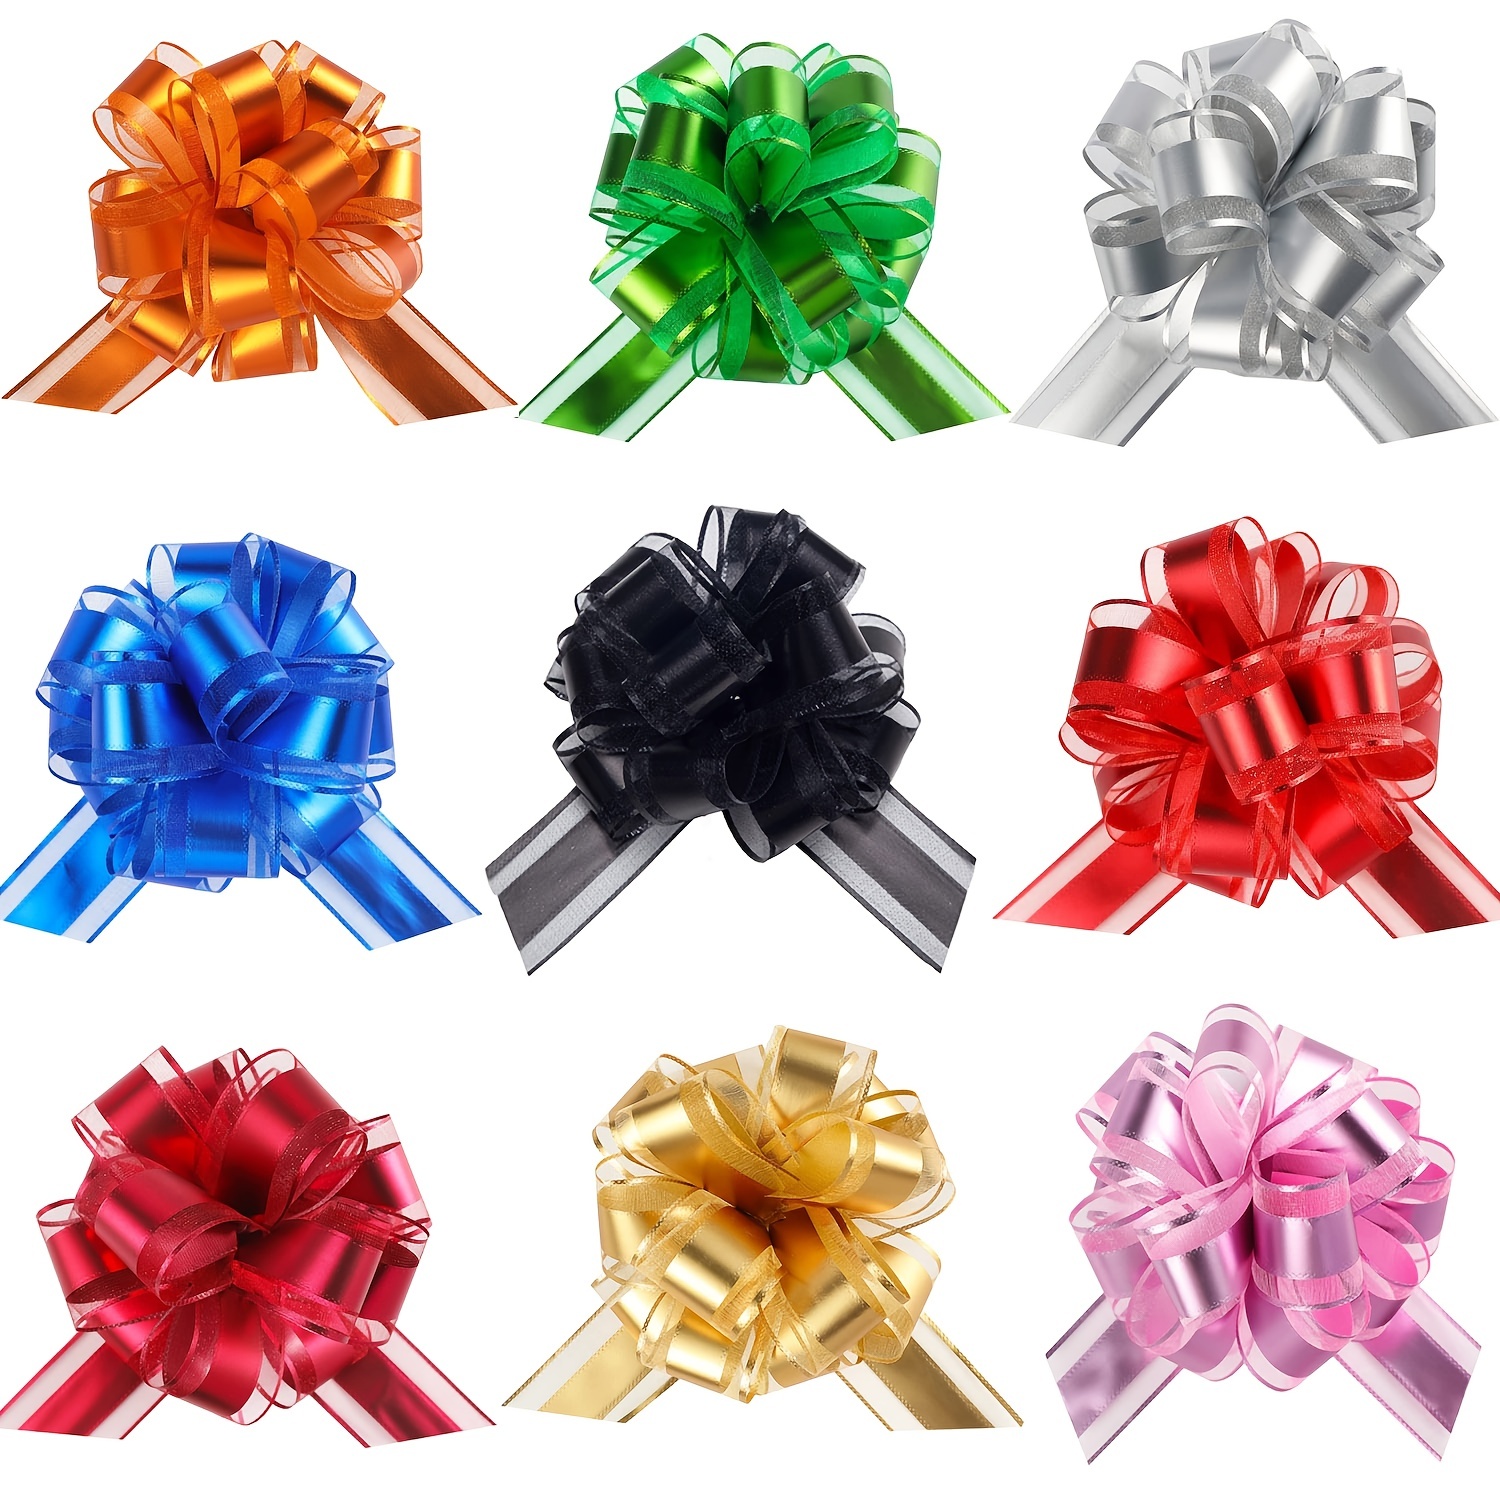 Poen 30 Pieces 5 Inch Christmas Large Ribbon Pull Bows Big Gift Bows Gift  Wrap Bows for Car Gift Bag Box Basket Wrapping Presents Birthday Wedding